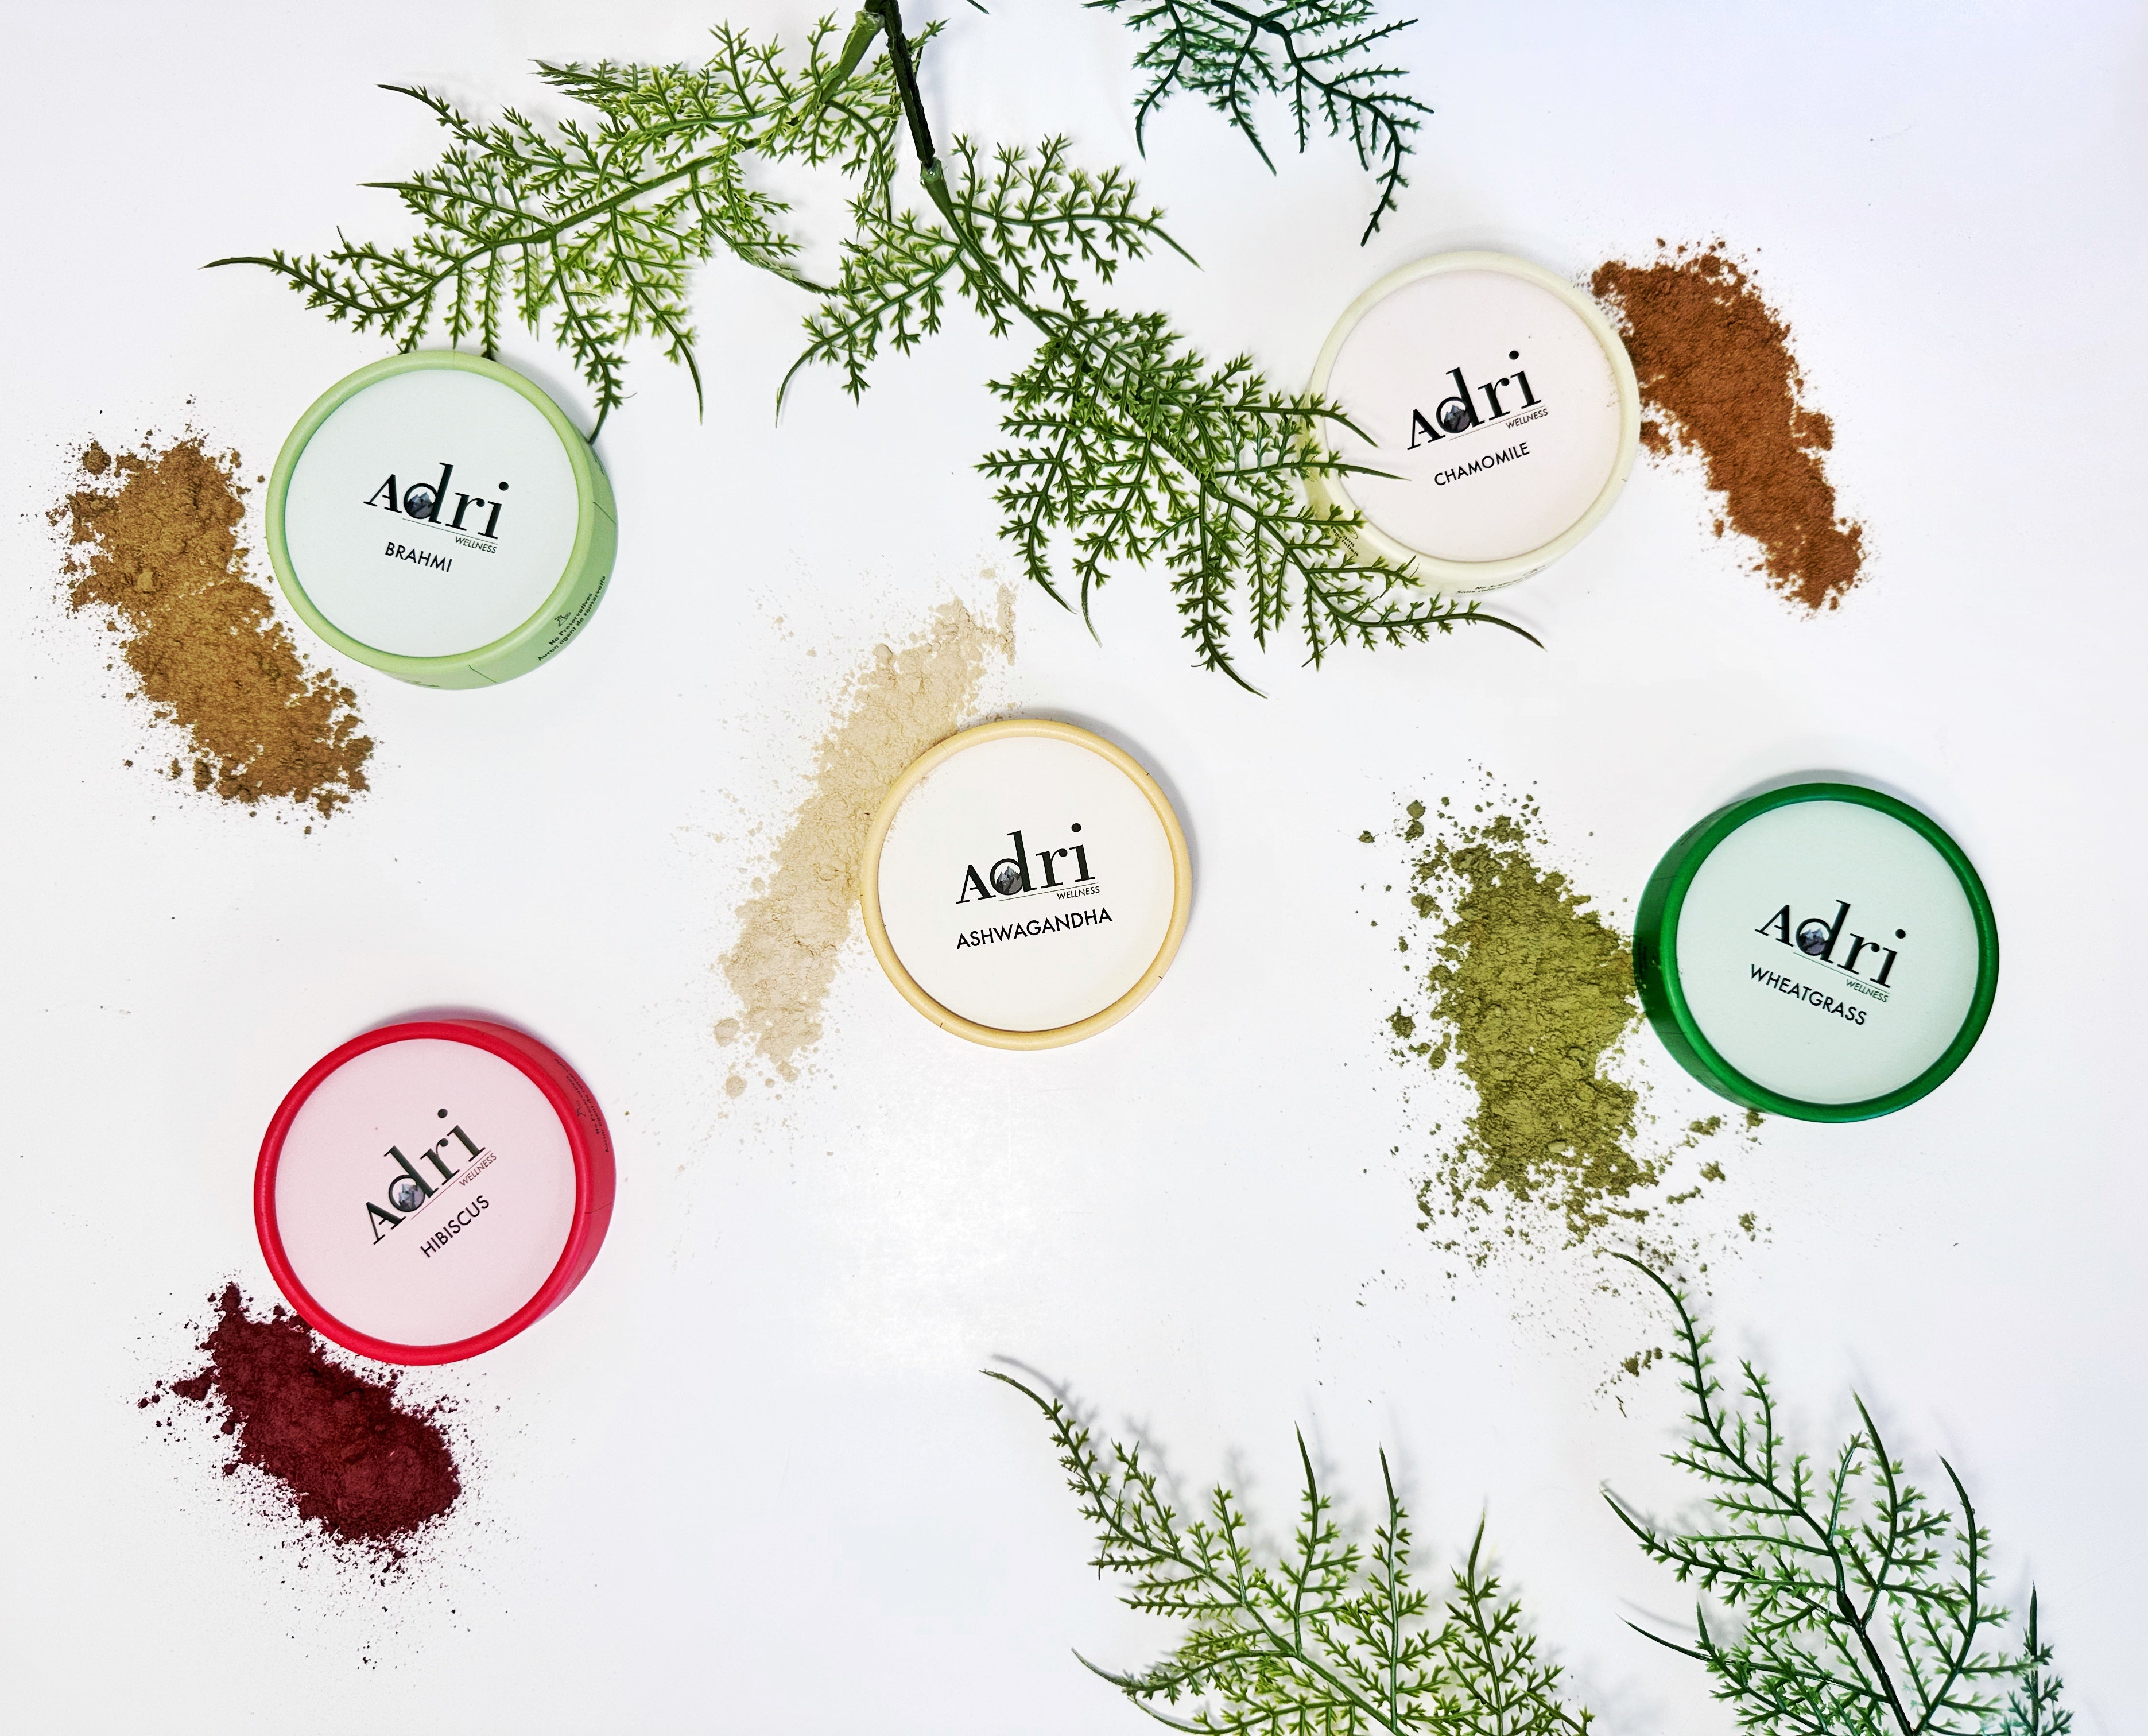 container lids of Adri Wellness' Brahmi Hibiscus Ashwagandha Wheatgrass and Chamomile Powders wth faux leaves on a white surface